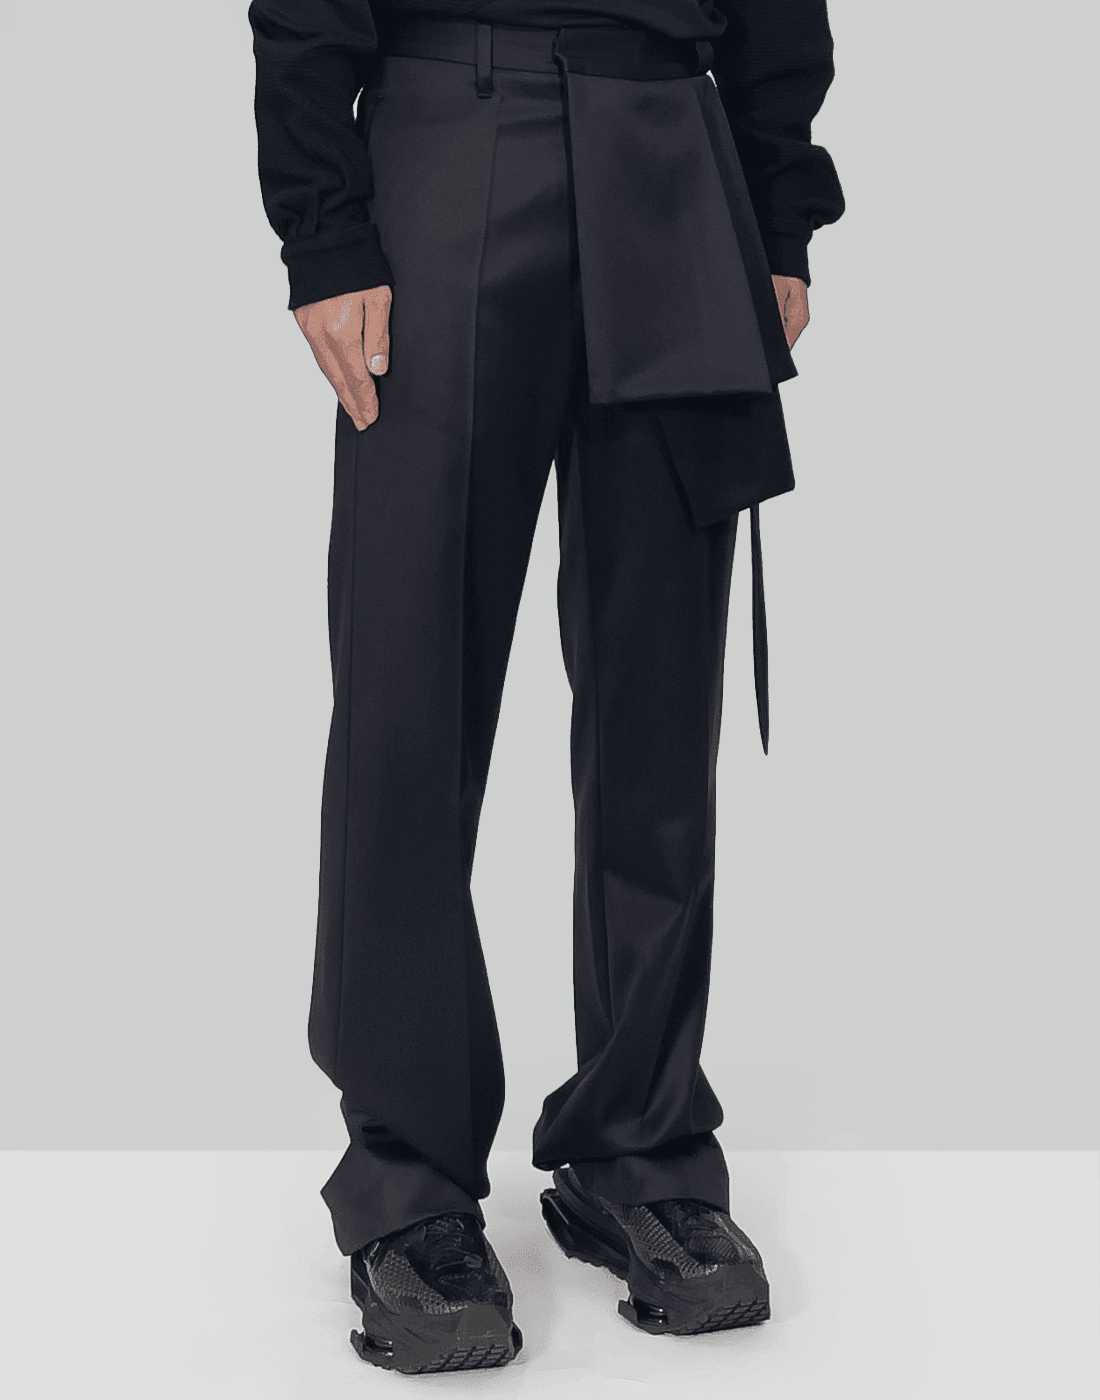 HELIOT EMIL PANEL TAILORED TROUSERS - 082plus